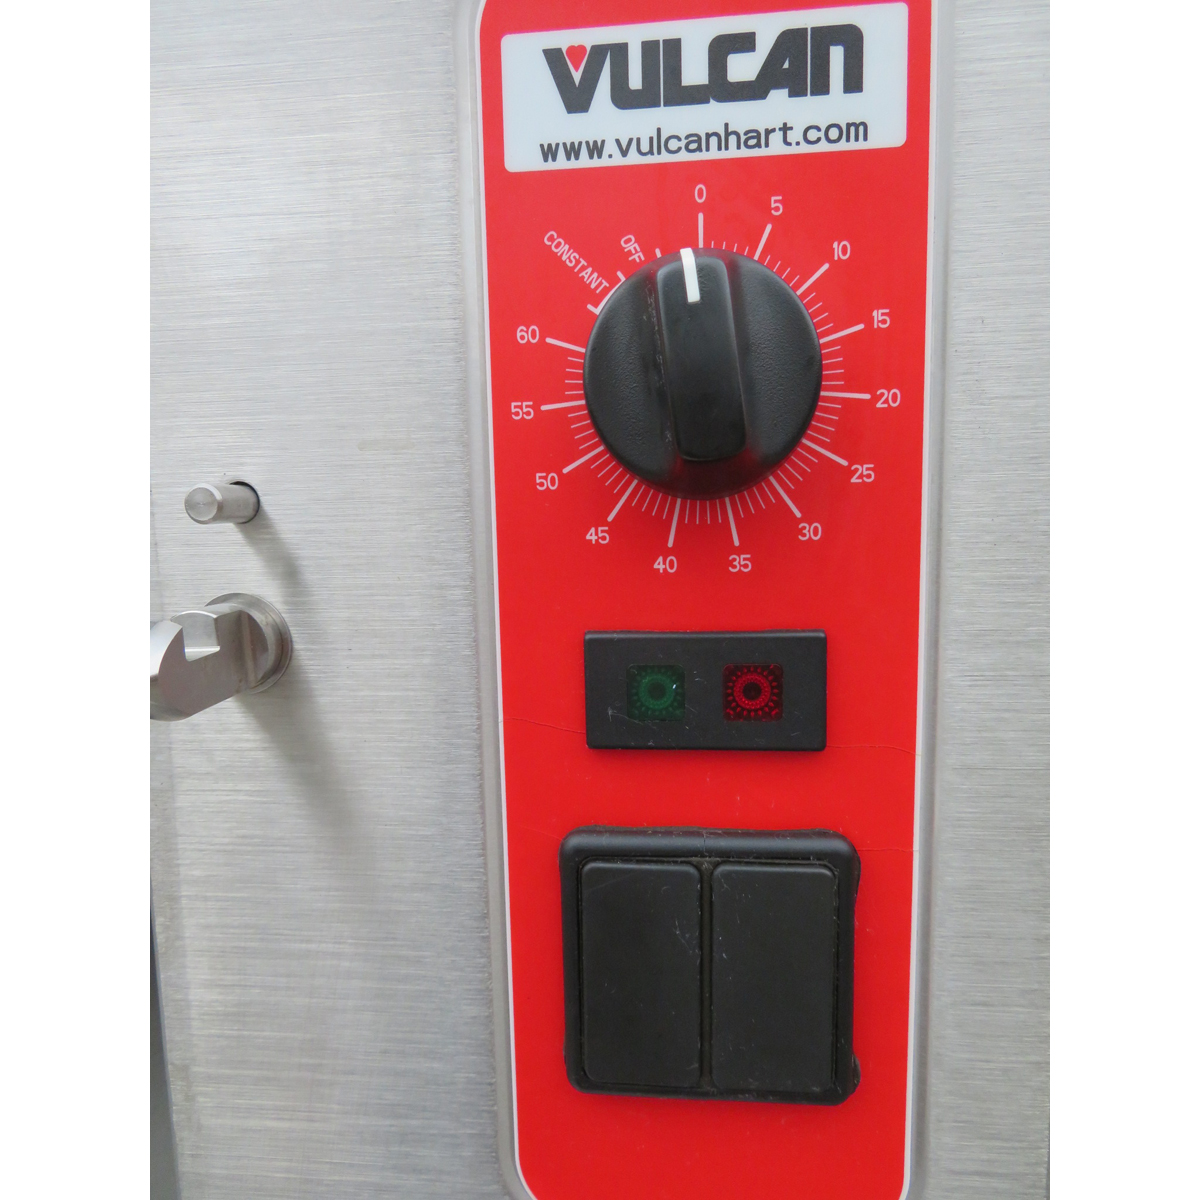 Vulcan C24GA10 Gas Convection Steamer, Used Great Condition image 4